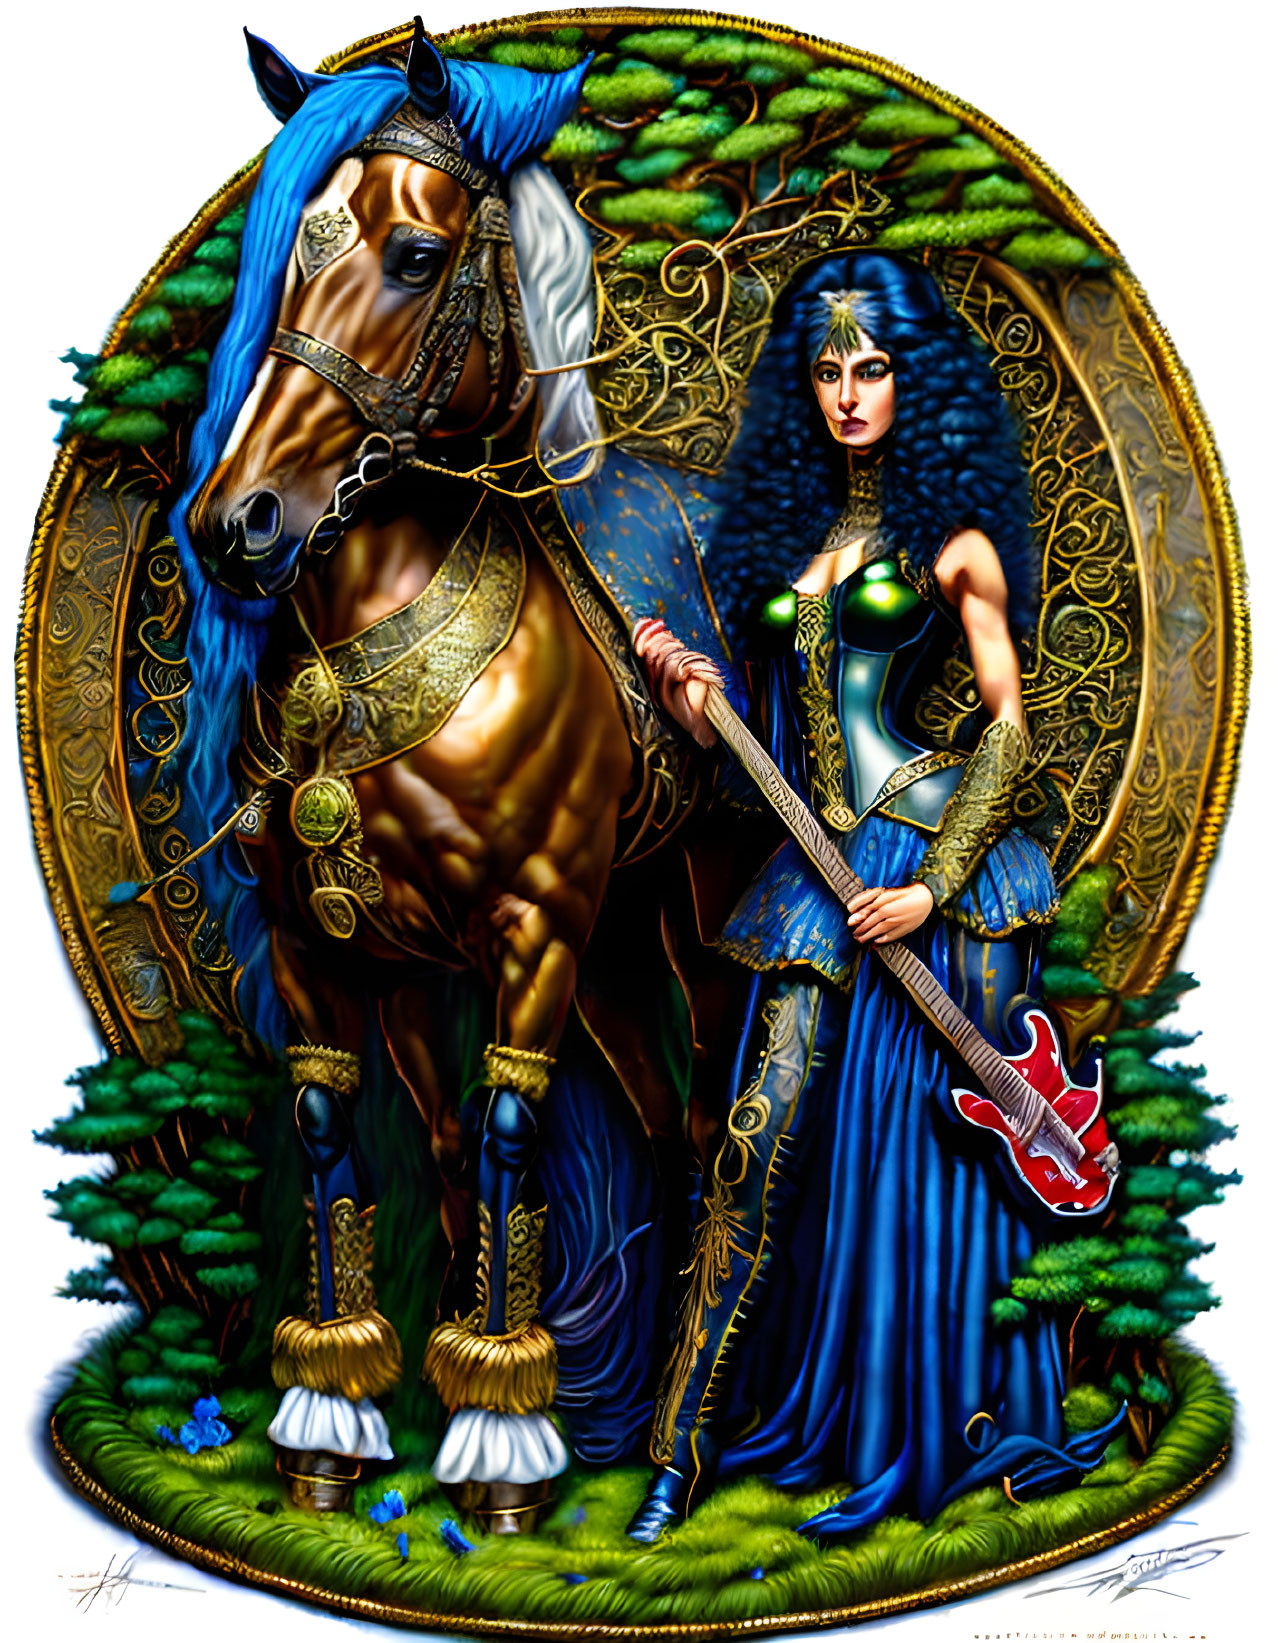 Fantasy illustration: Woman in blue medieval attire with guitar next to majestic horse in ornate tack and